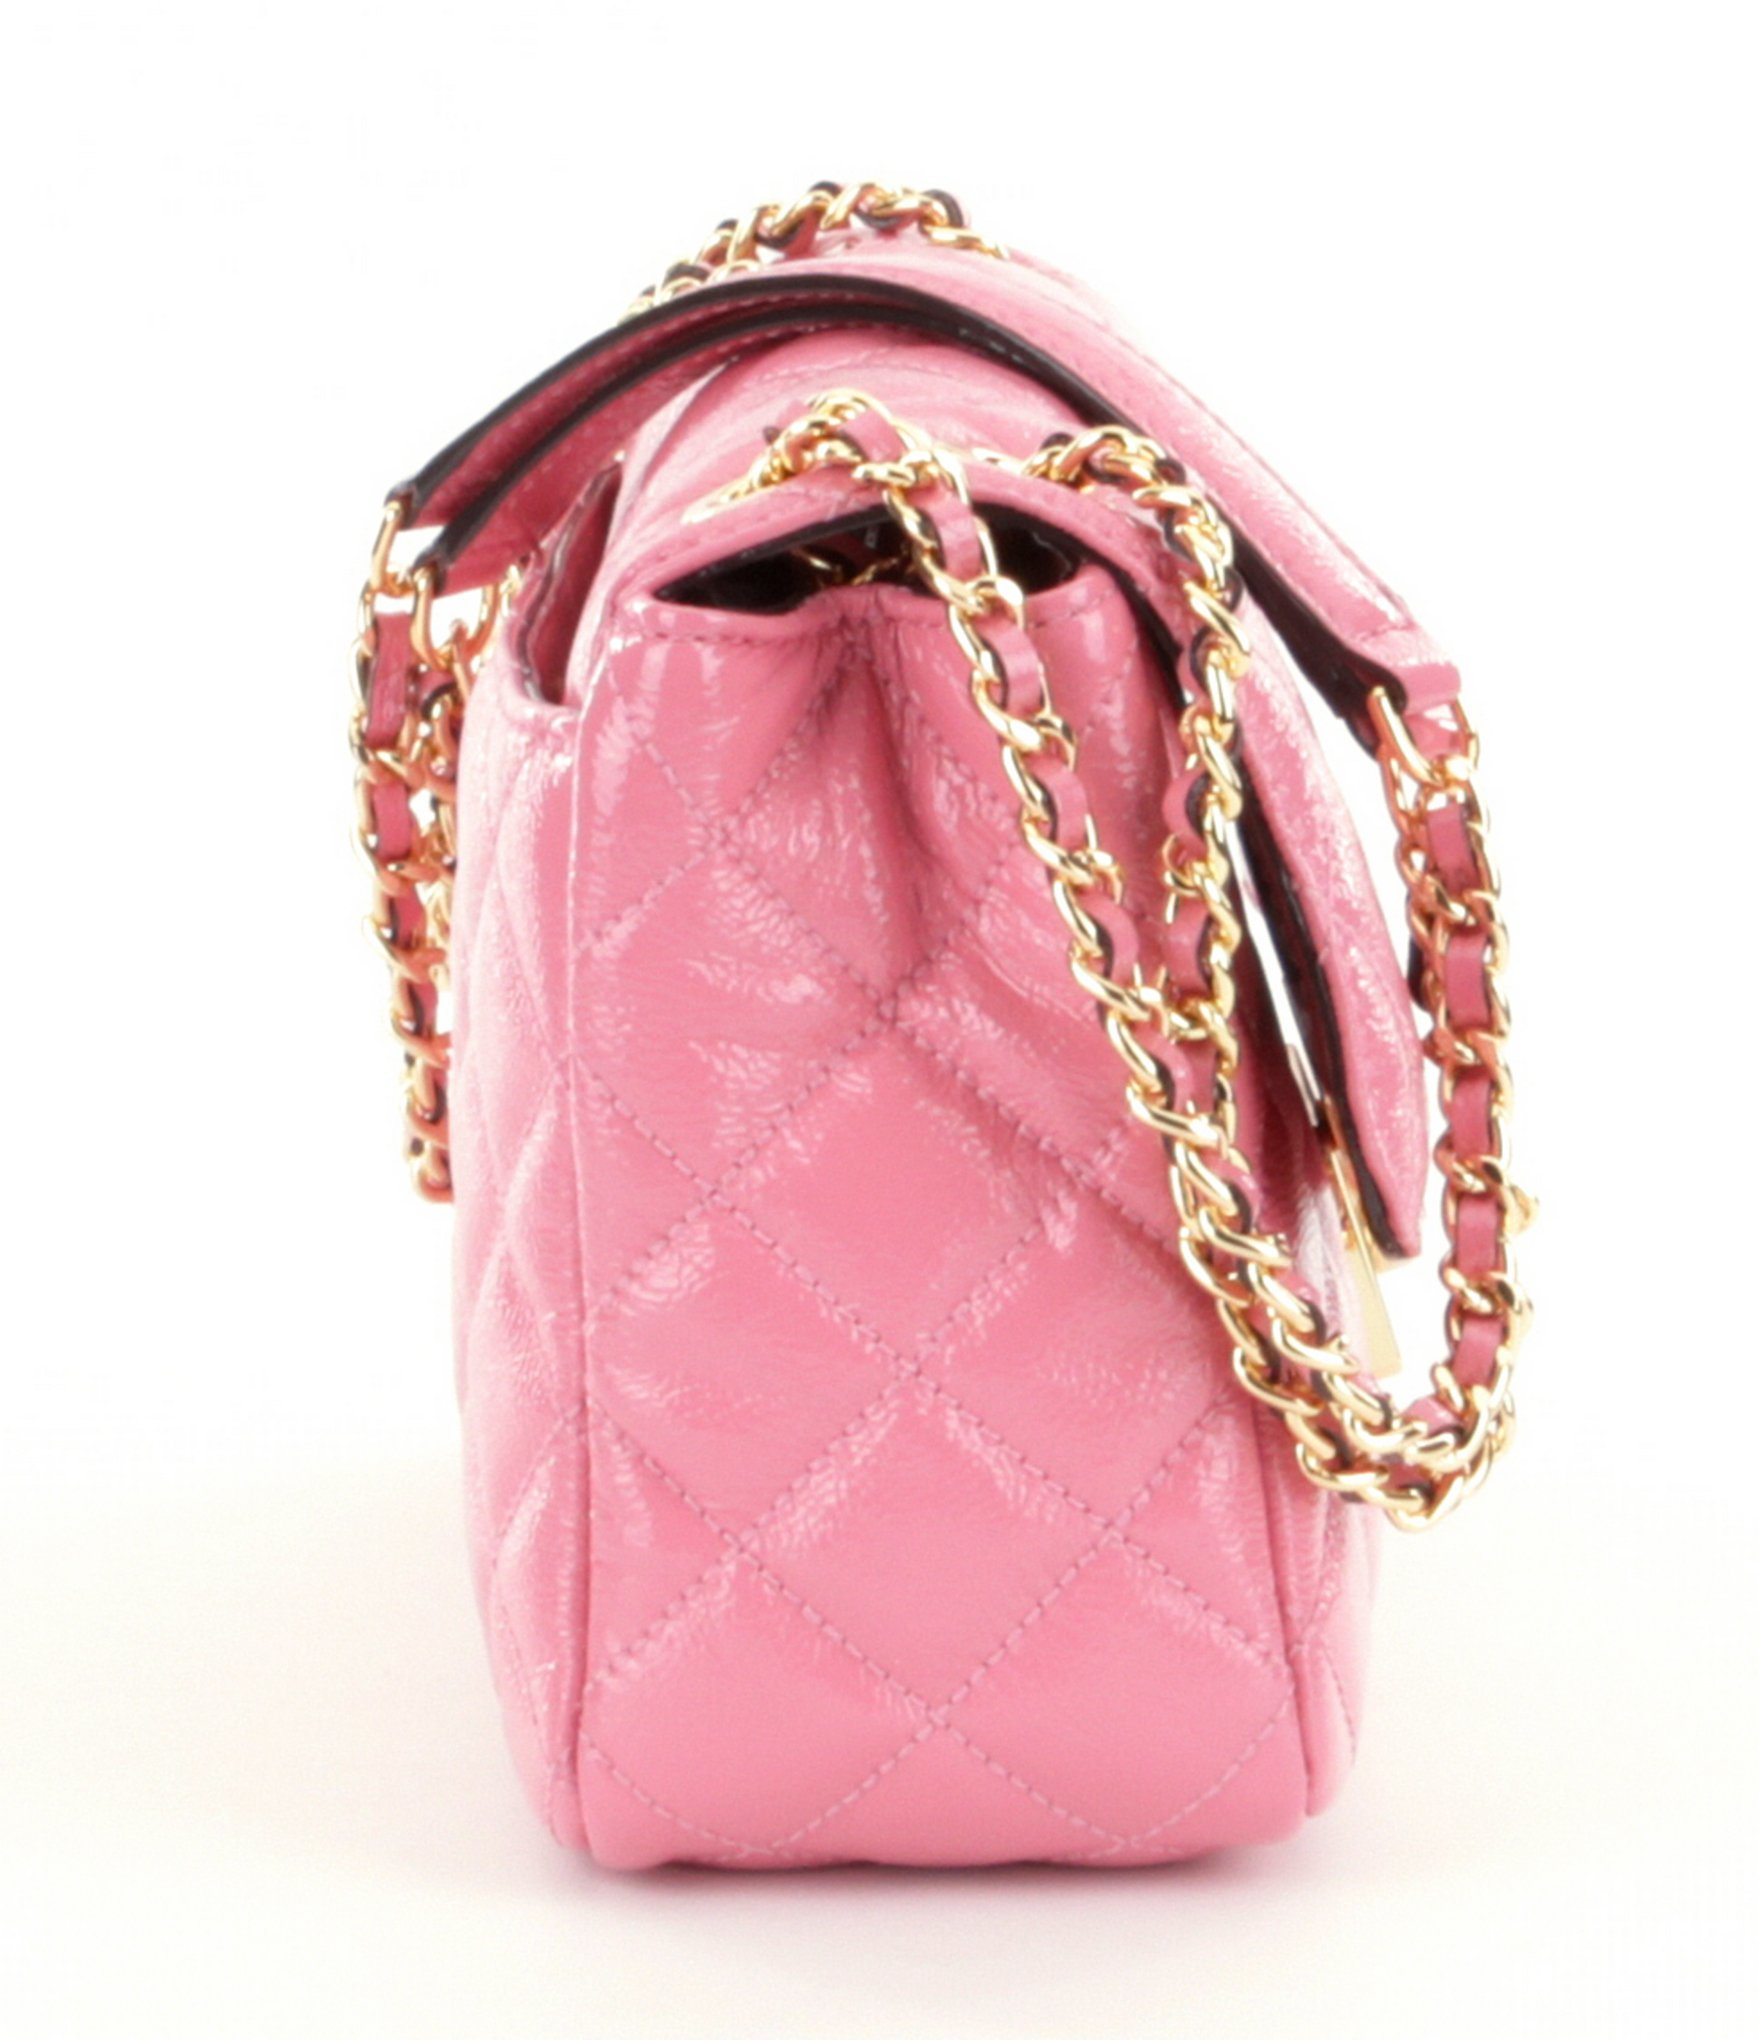 Lyst - MICHAEL Michael Kors Sloan Quilted Patent Leather Chain-strap Large Shoulder Bag in Pink